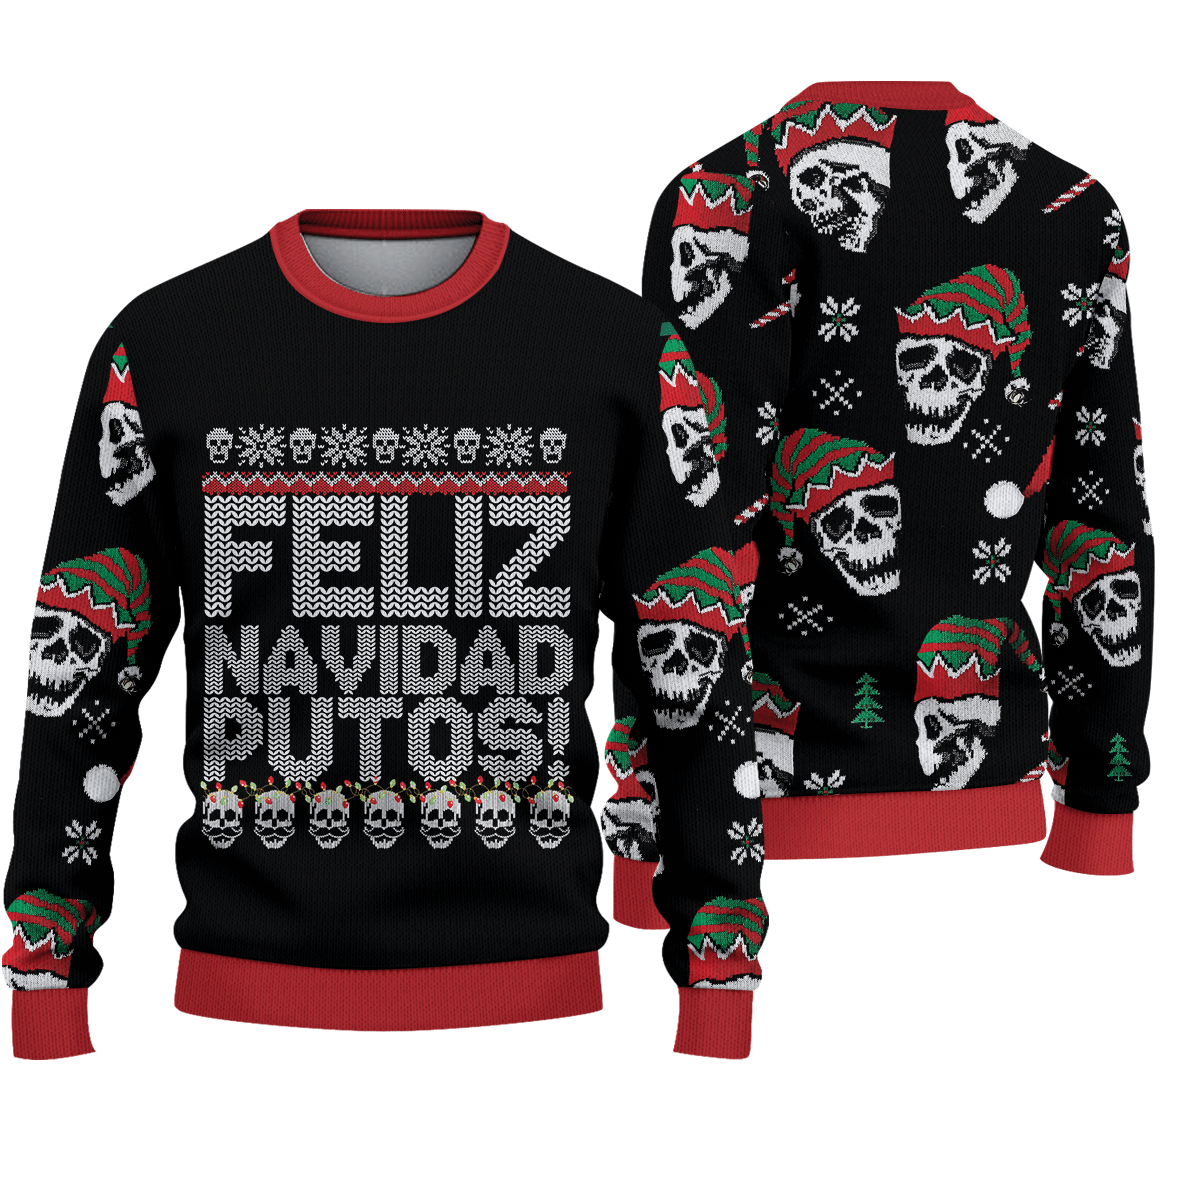 BUY NOW TOP UGLY CHRISTMAS SWEATER SO HOT IN HOLIDAY 43